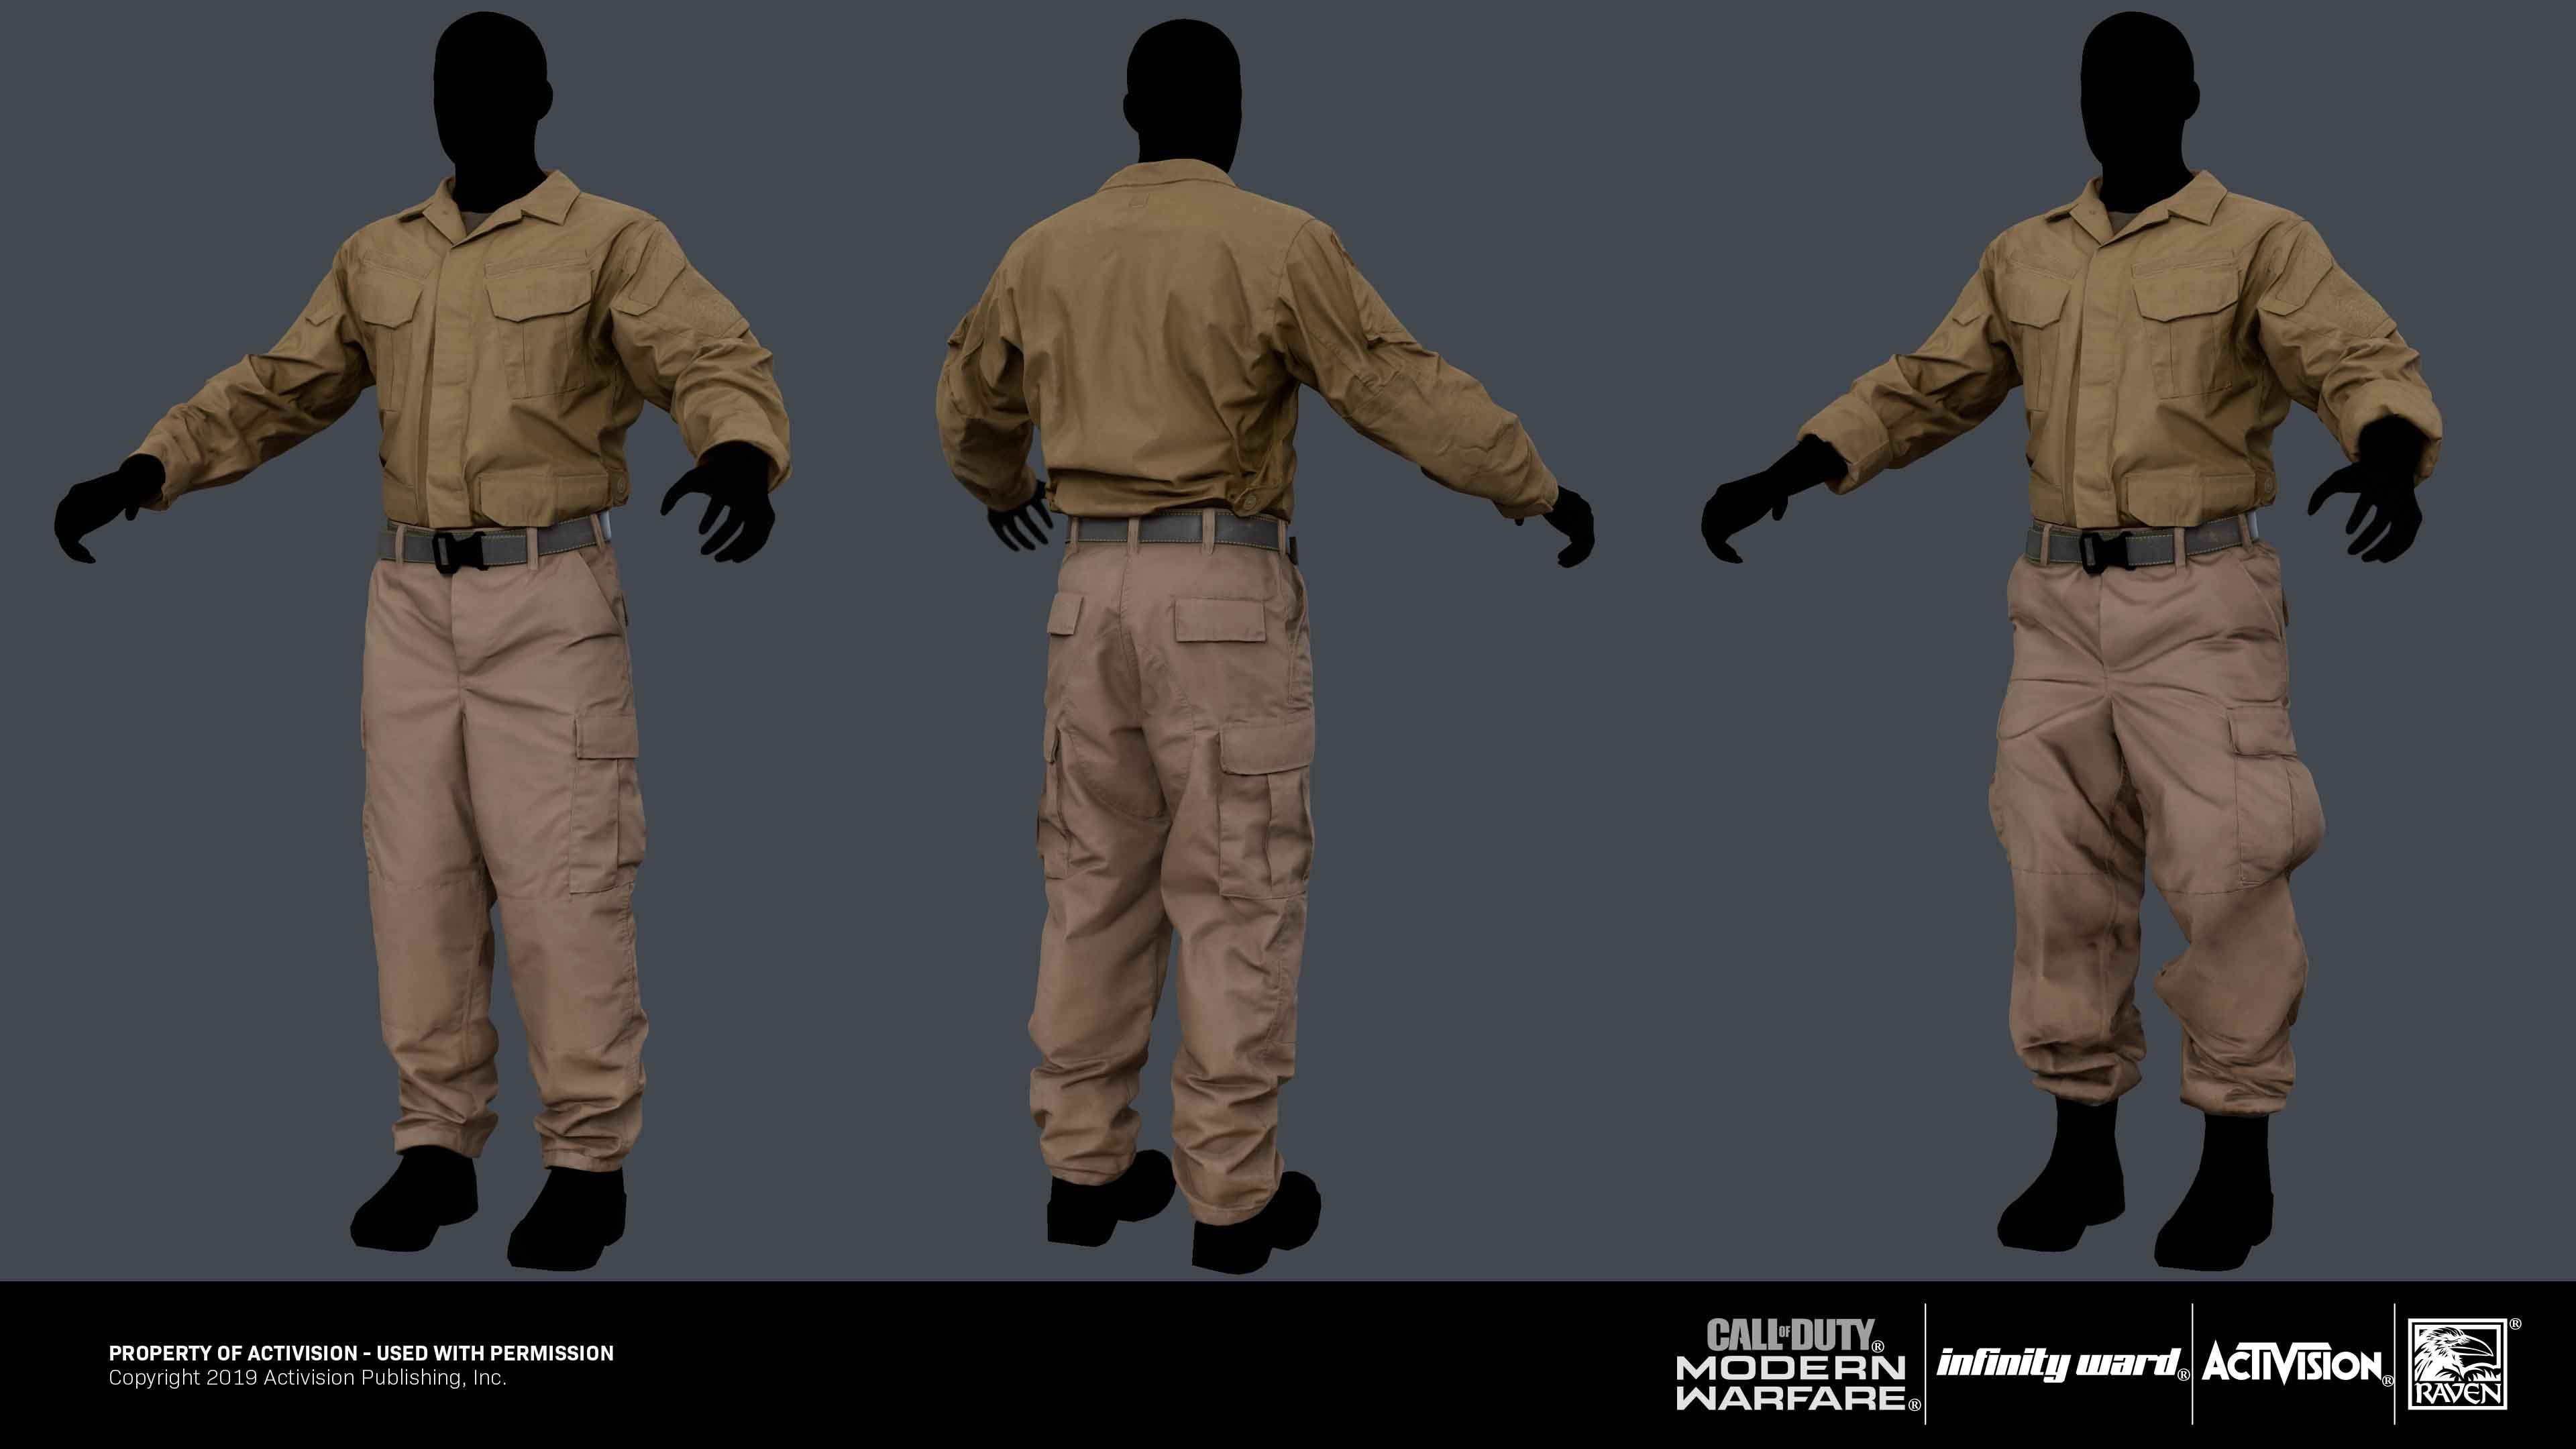 BDU_clothes: Highpoly/ scan cleanup, lowpoly, bakes and textures/ cleanup. 